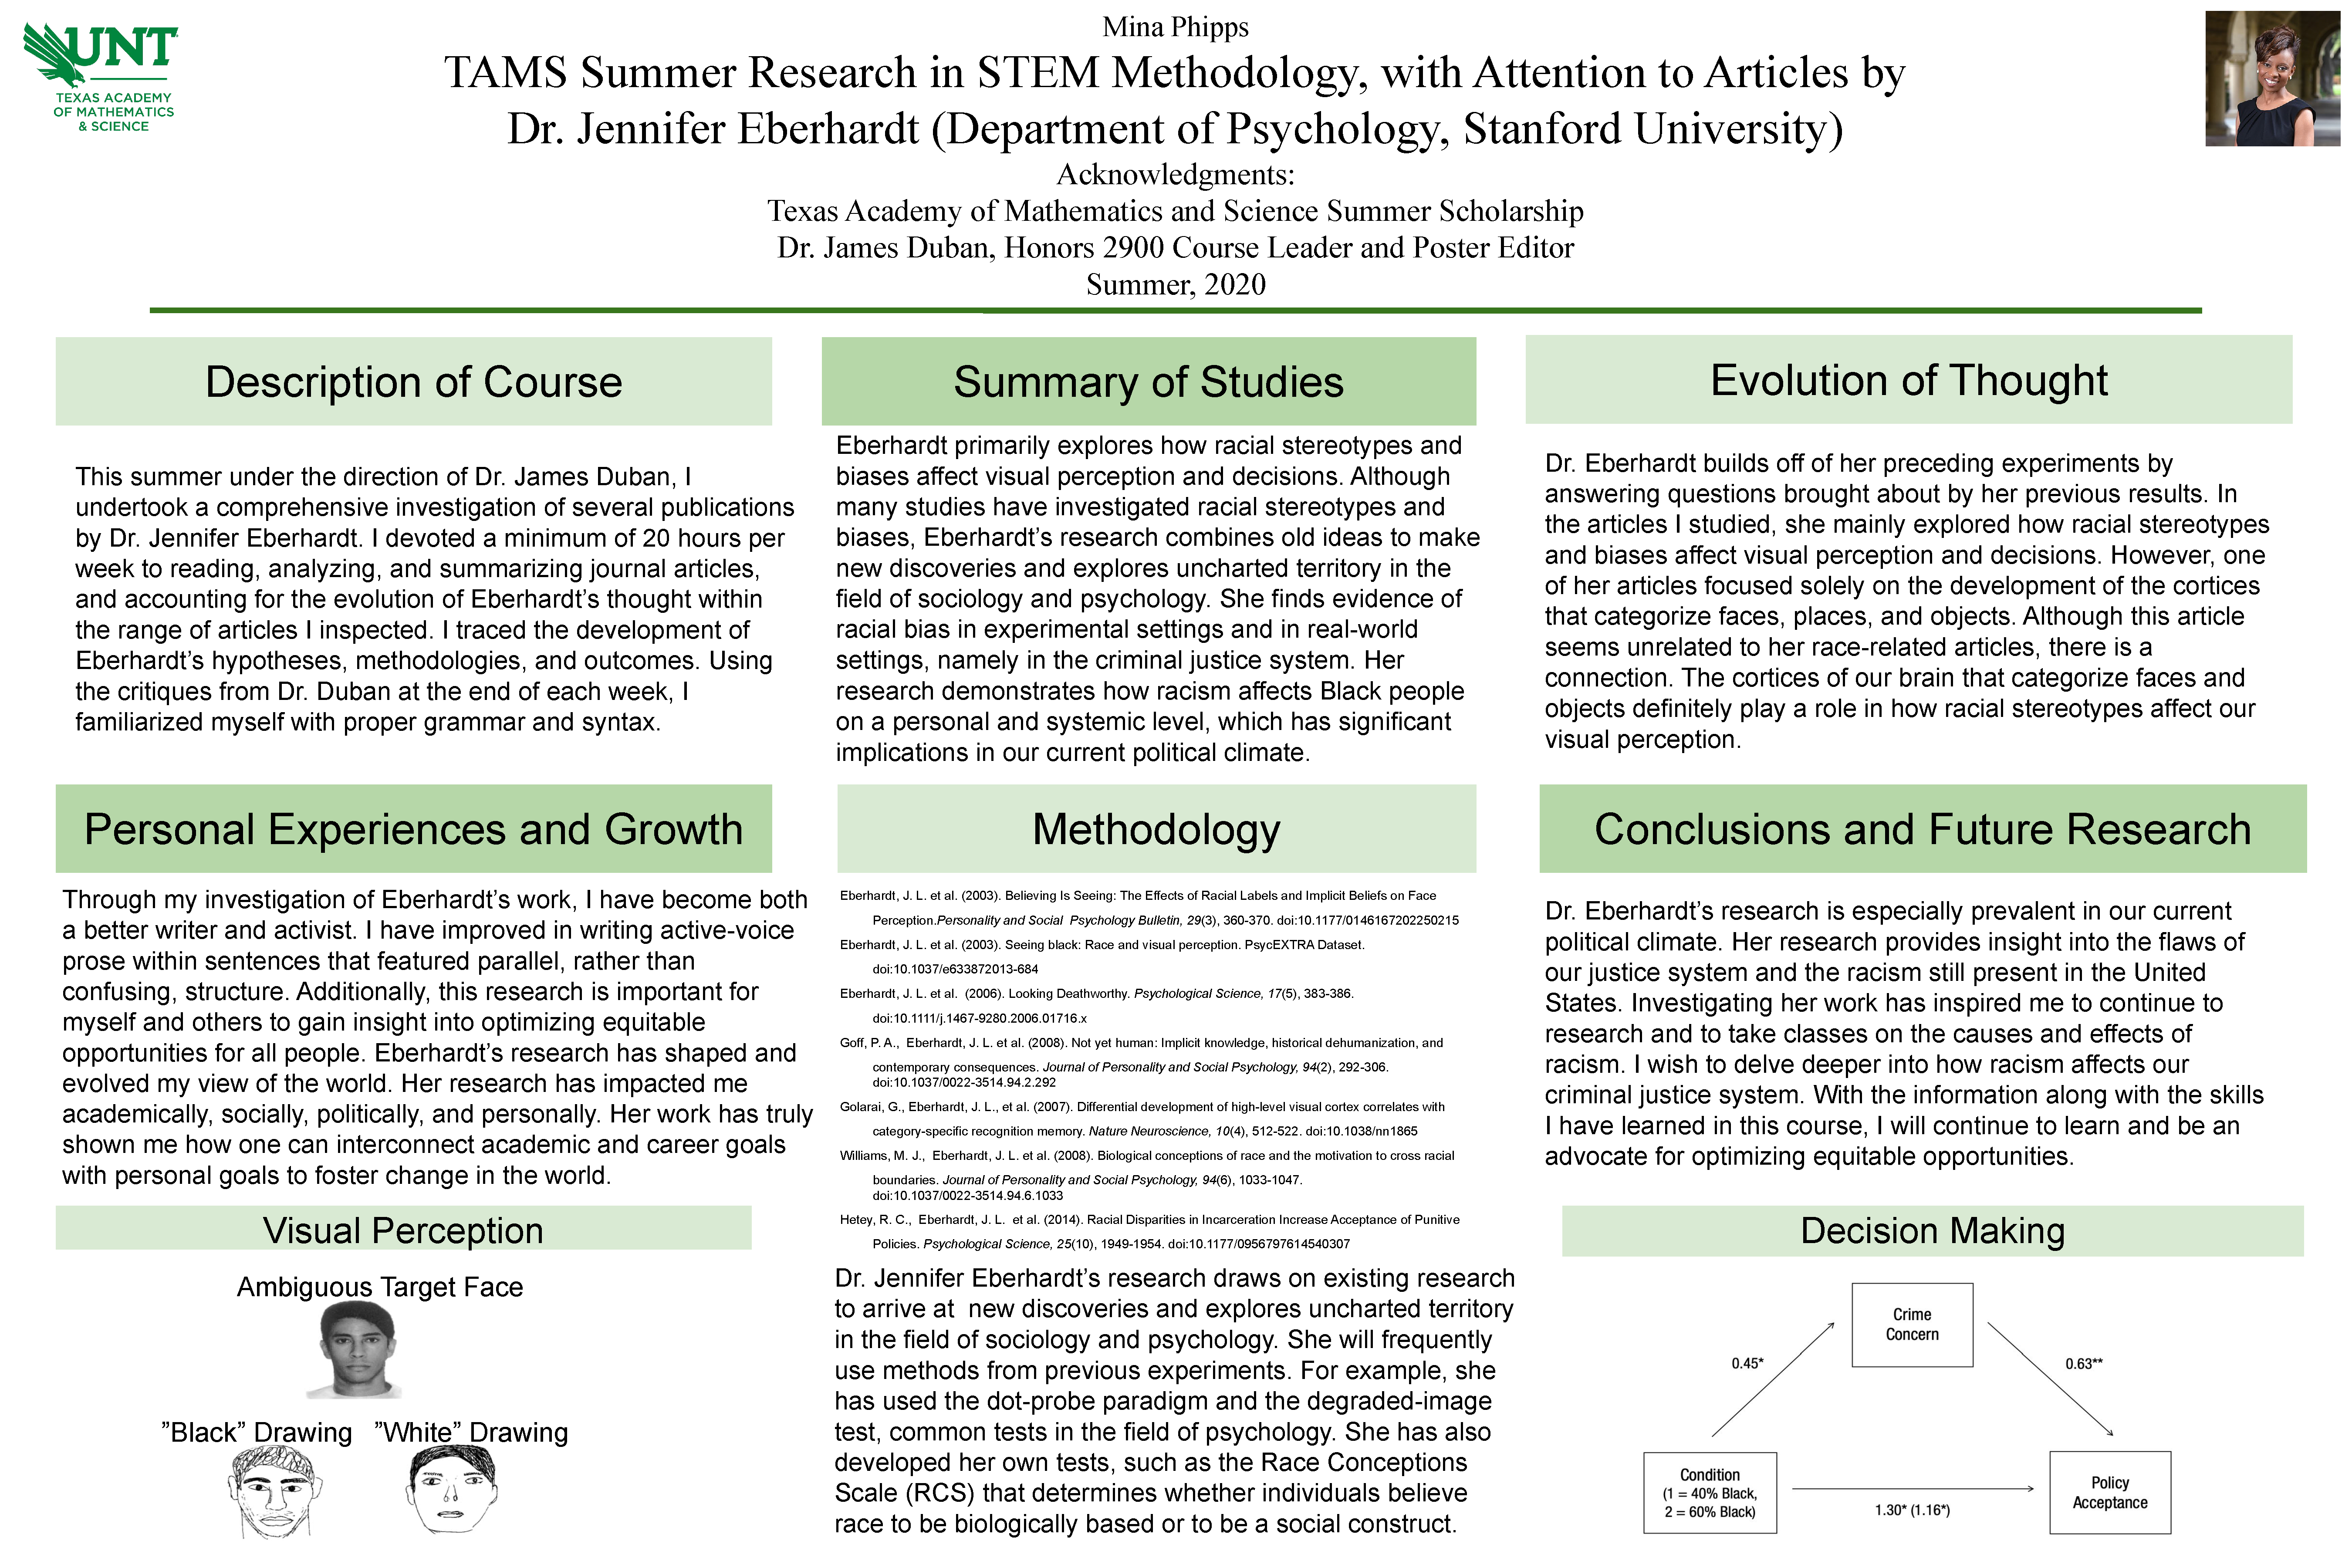 TAMS Summer Research in STEM Methodology, with Attention to Articles by Dr. Jennifer Eberhardt